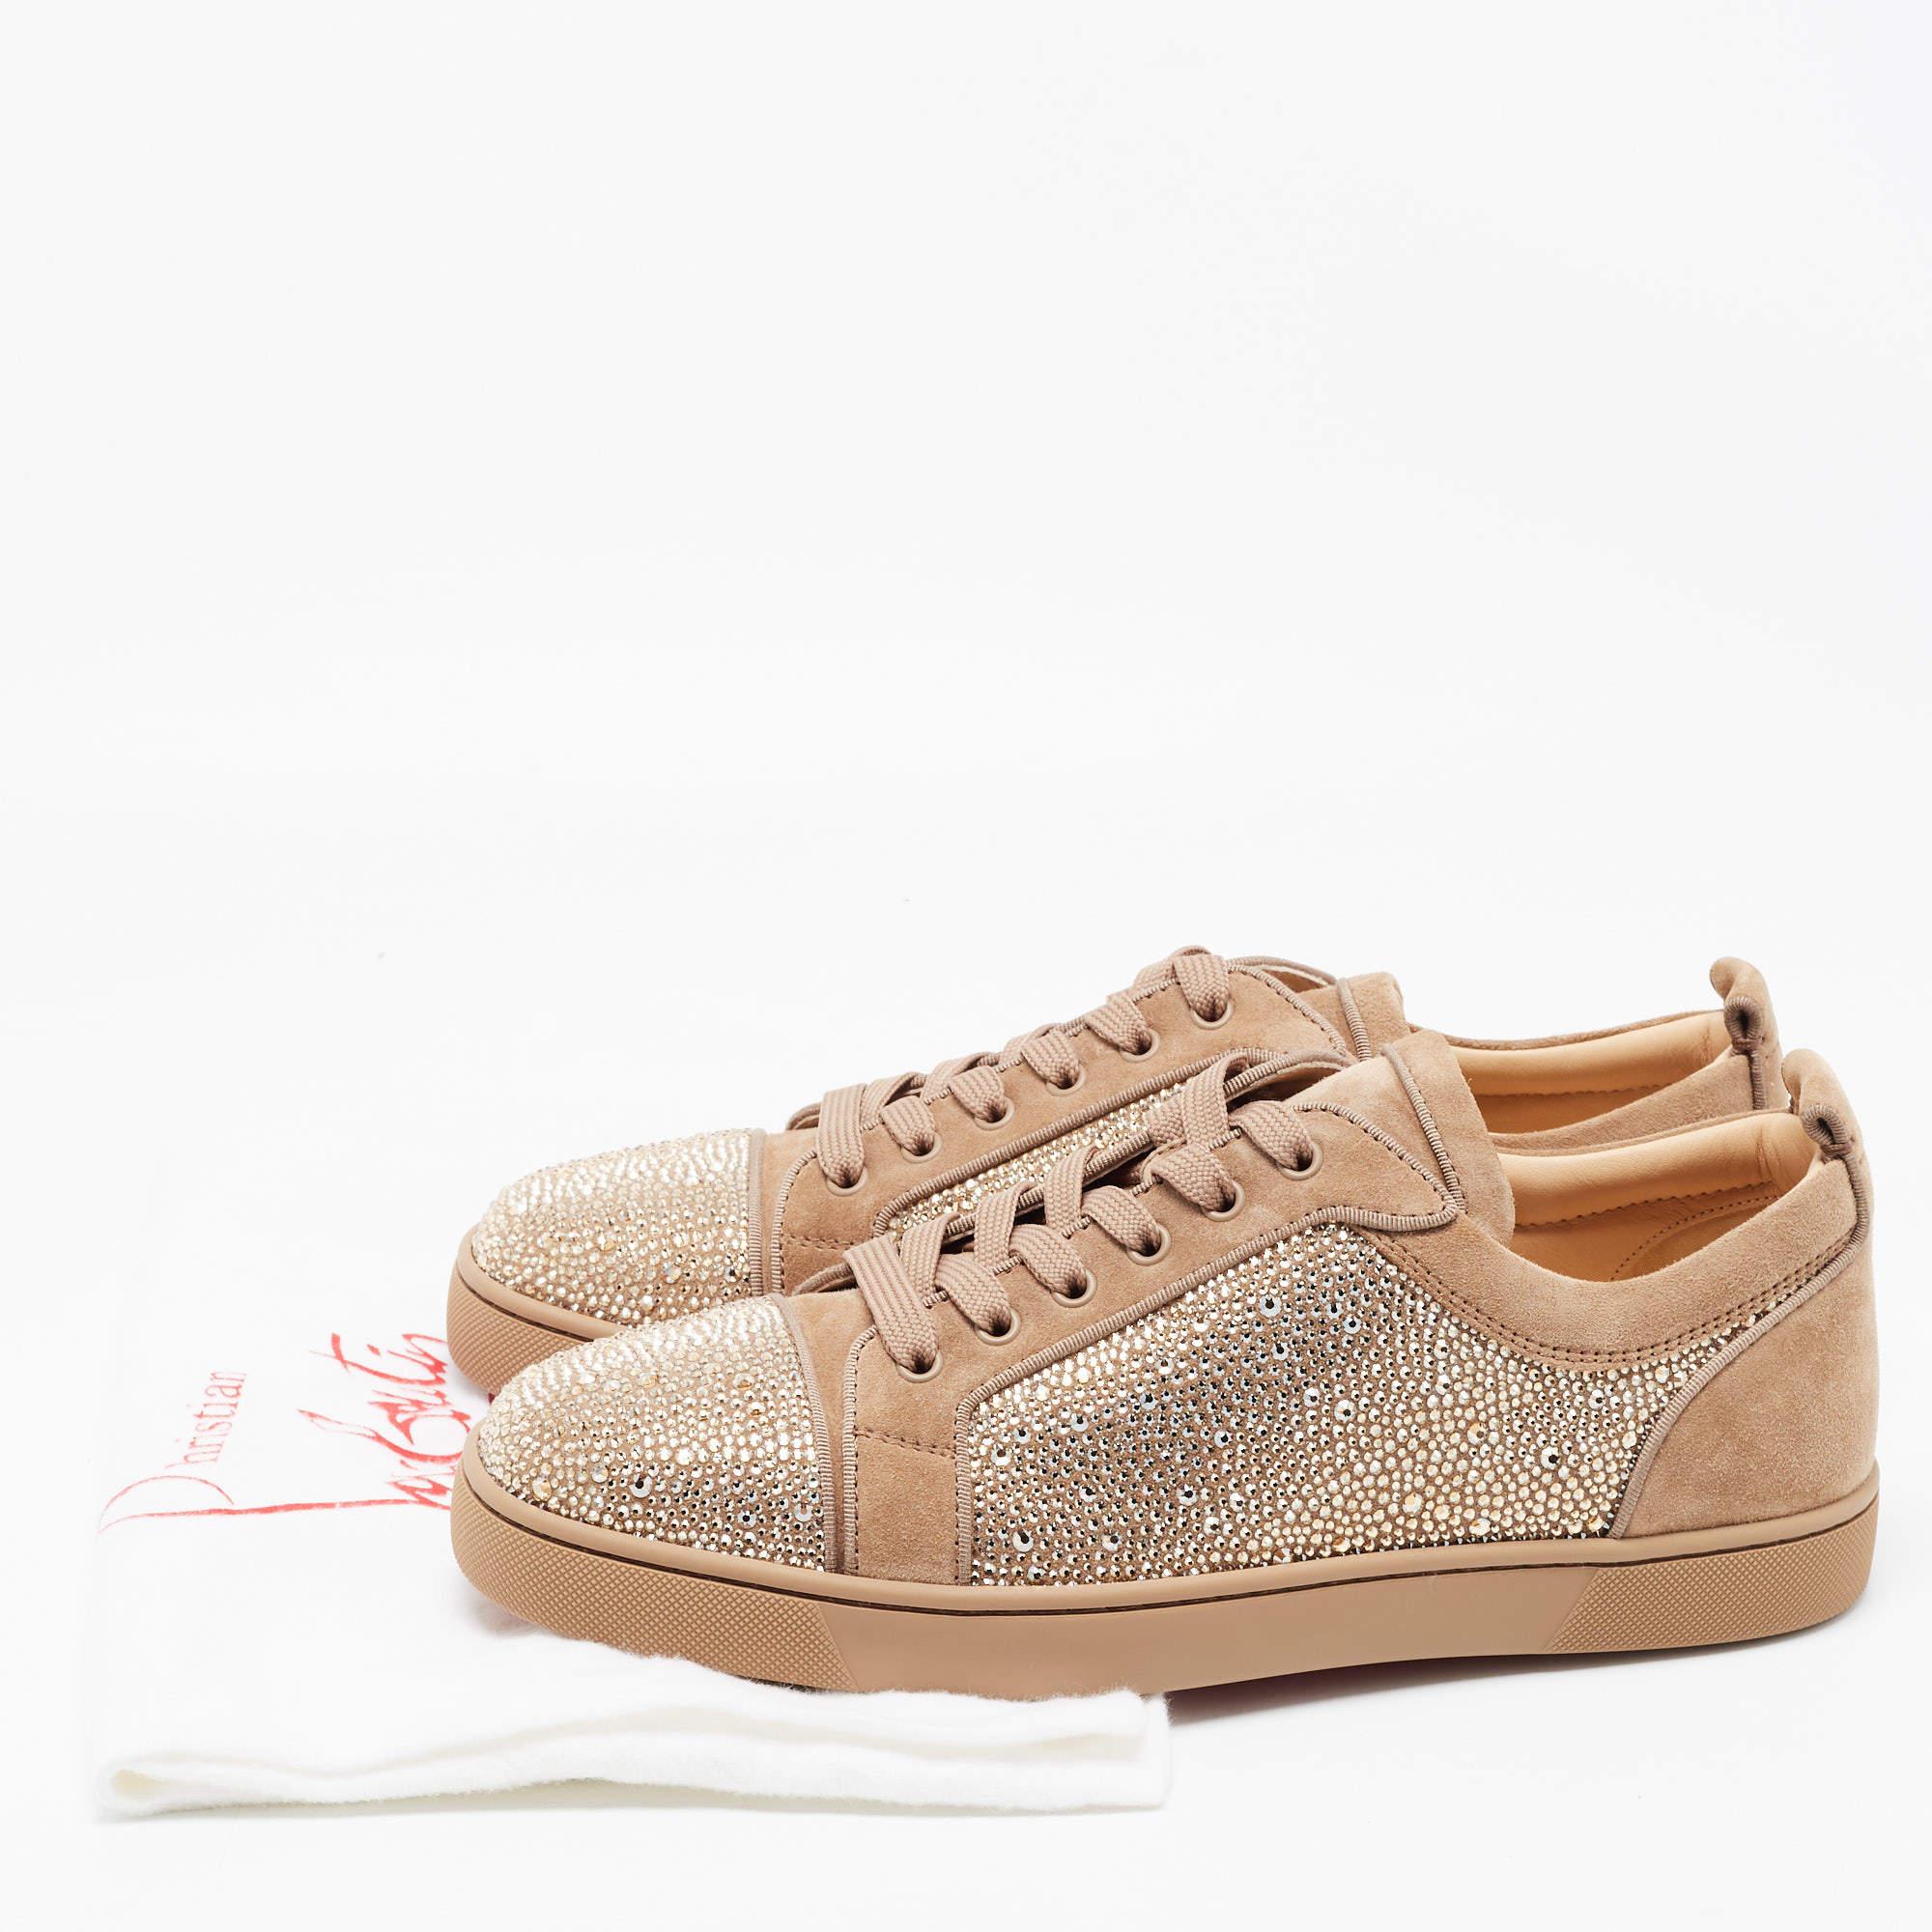 Christian Louboutin Beige Suede Louis Junior Strass Low Top Sneakers Size 43.5 1